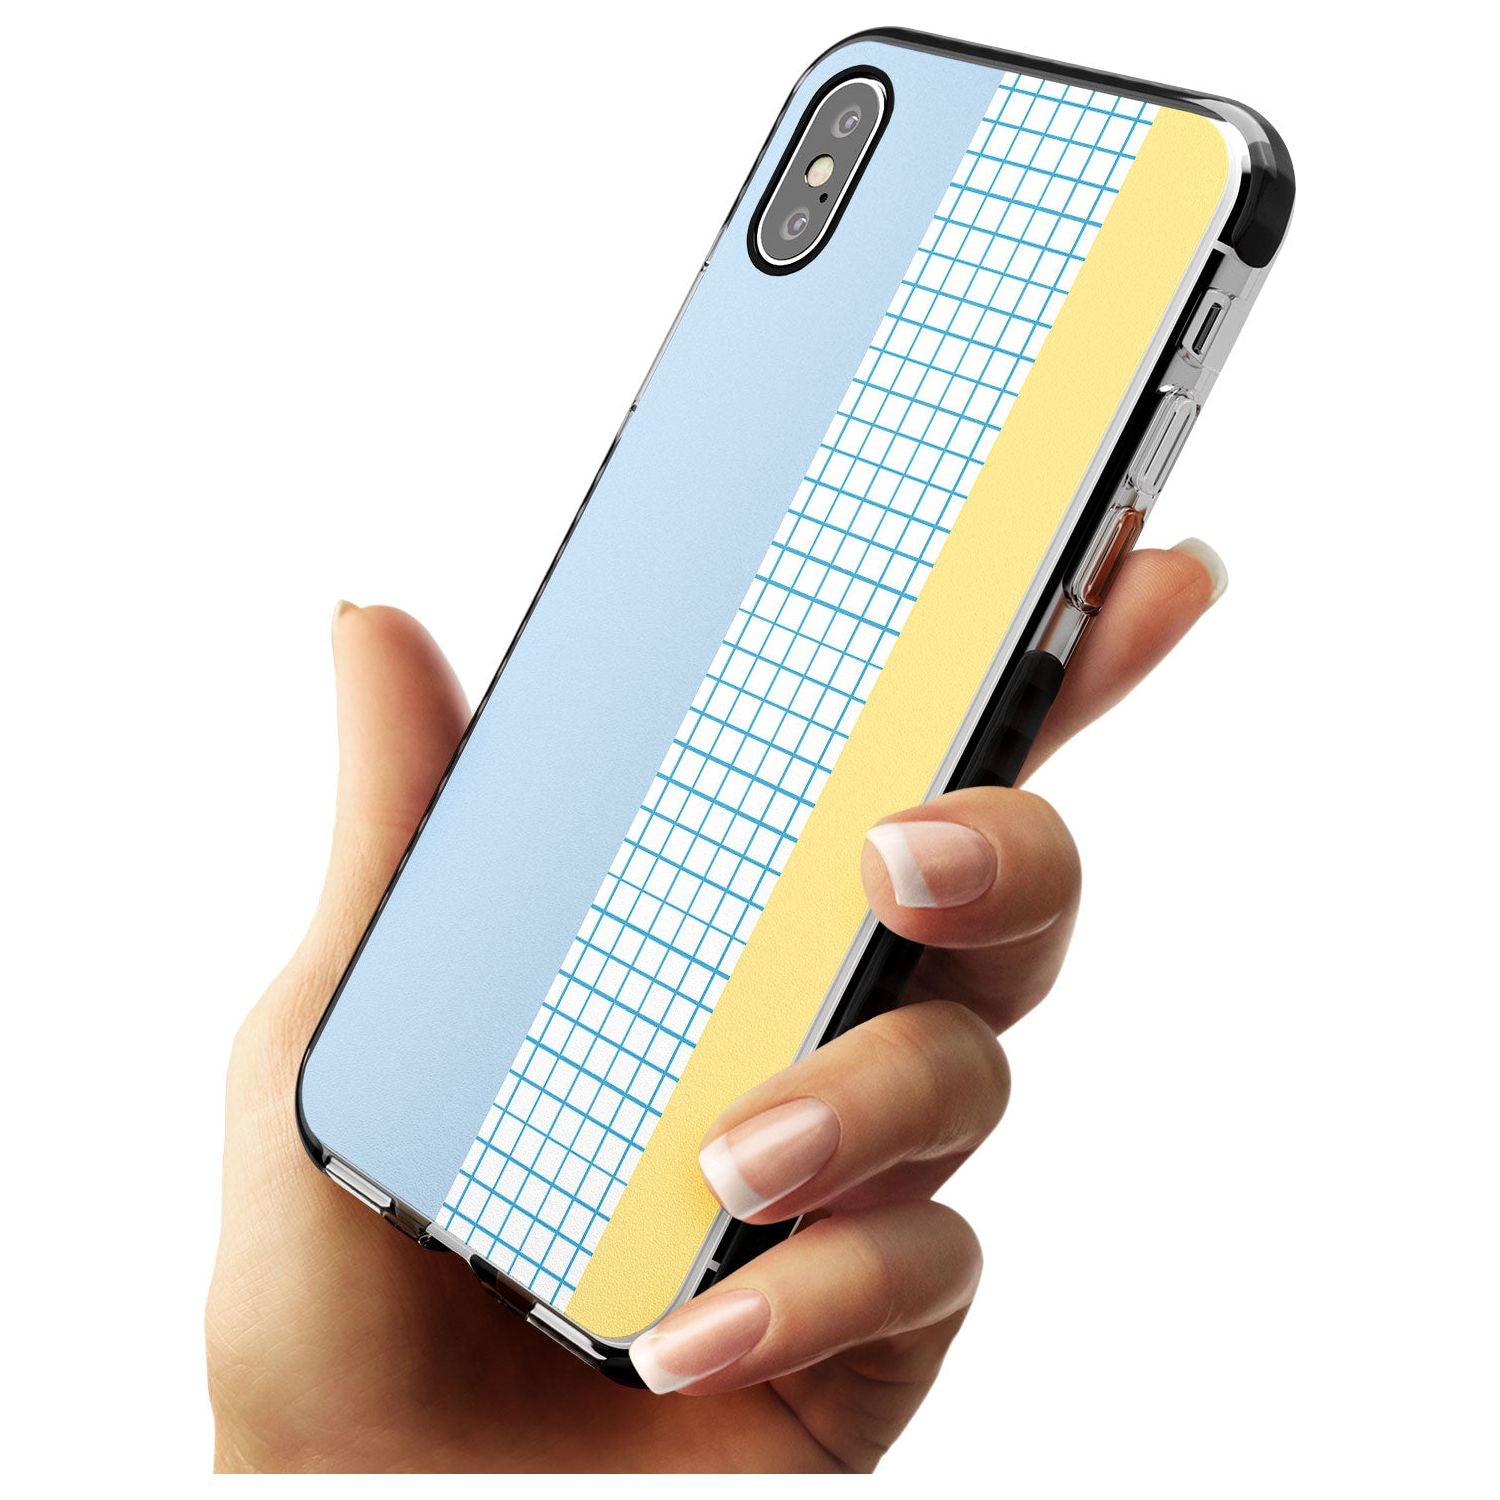 Abstract Grid Blue & Yellow Black Impact Phone Case for iPhone X XS Max XR